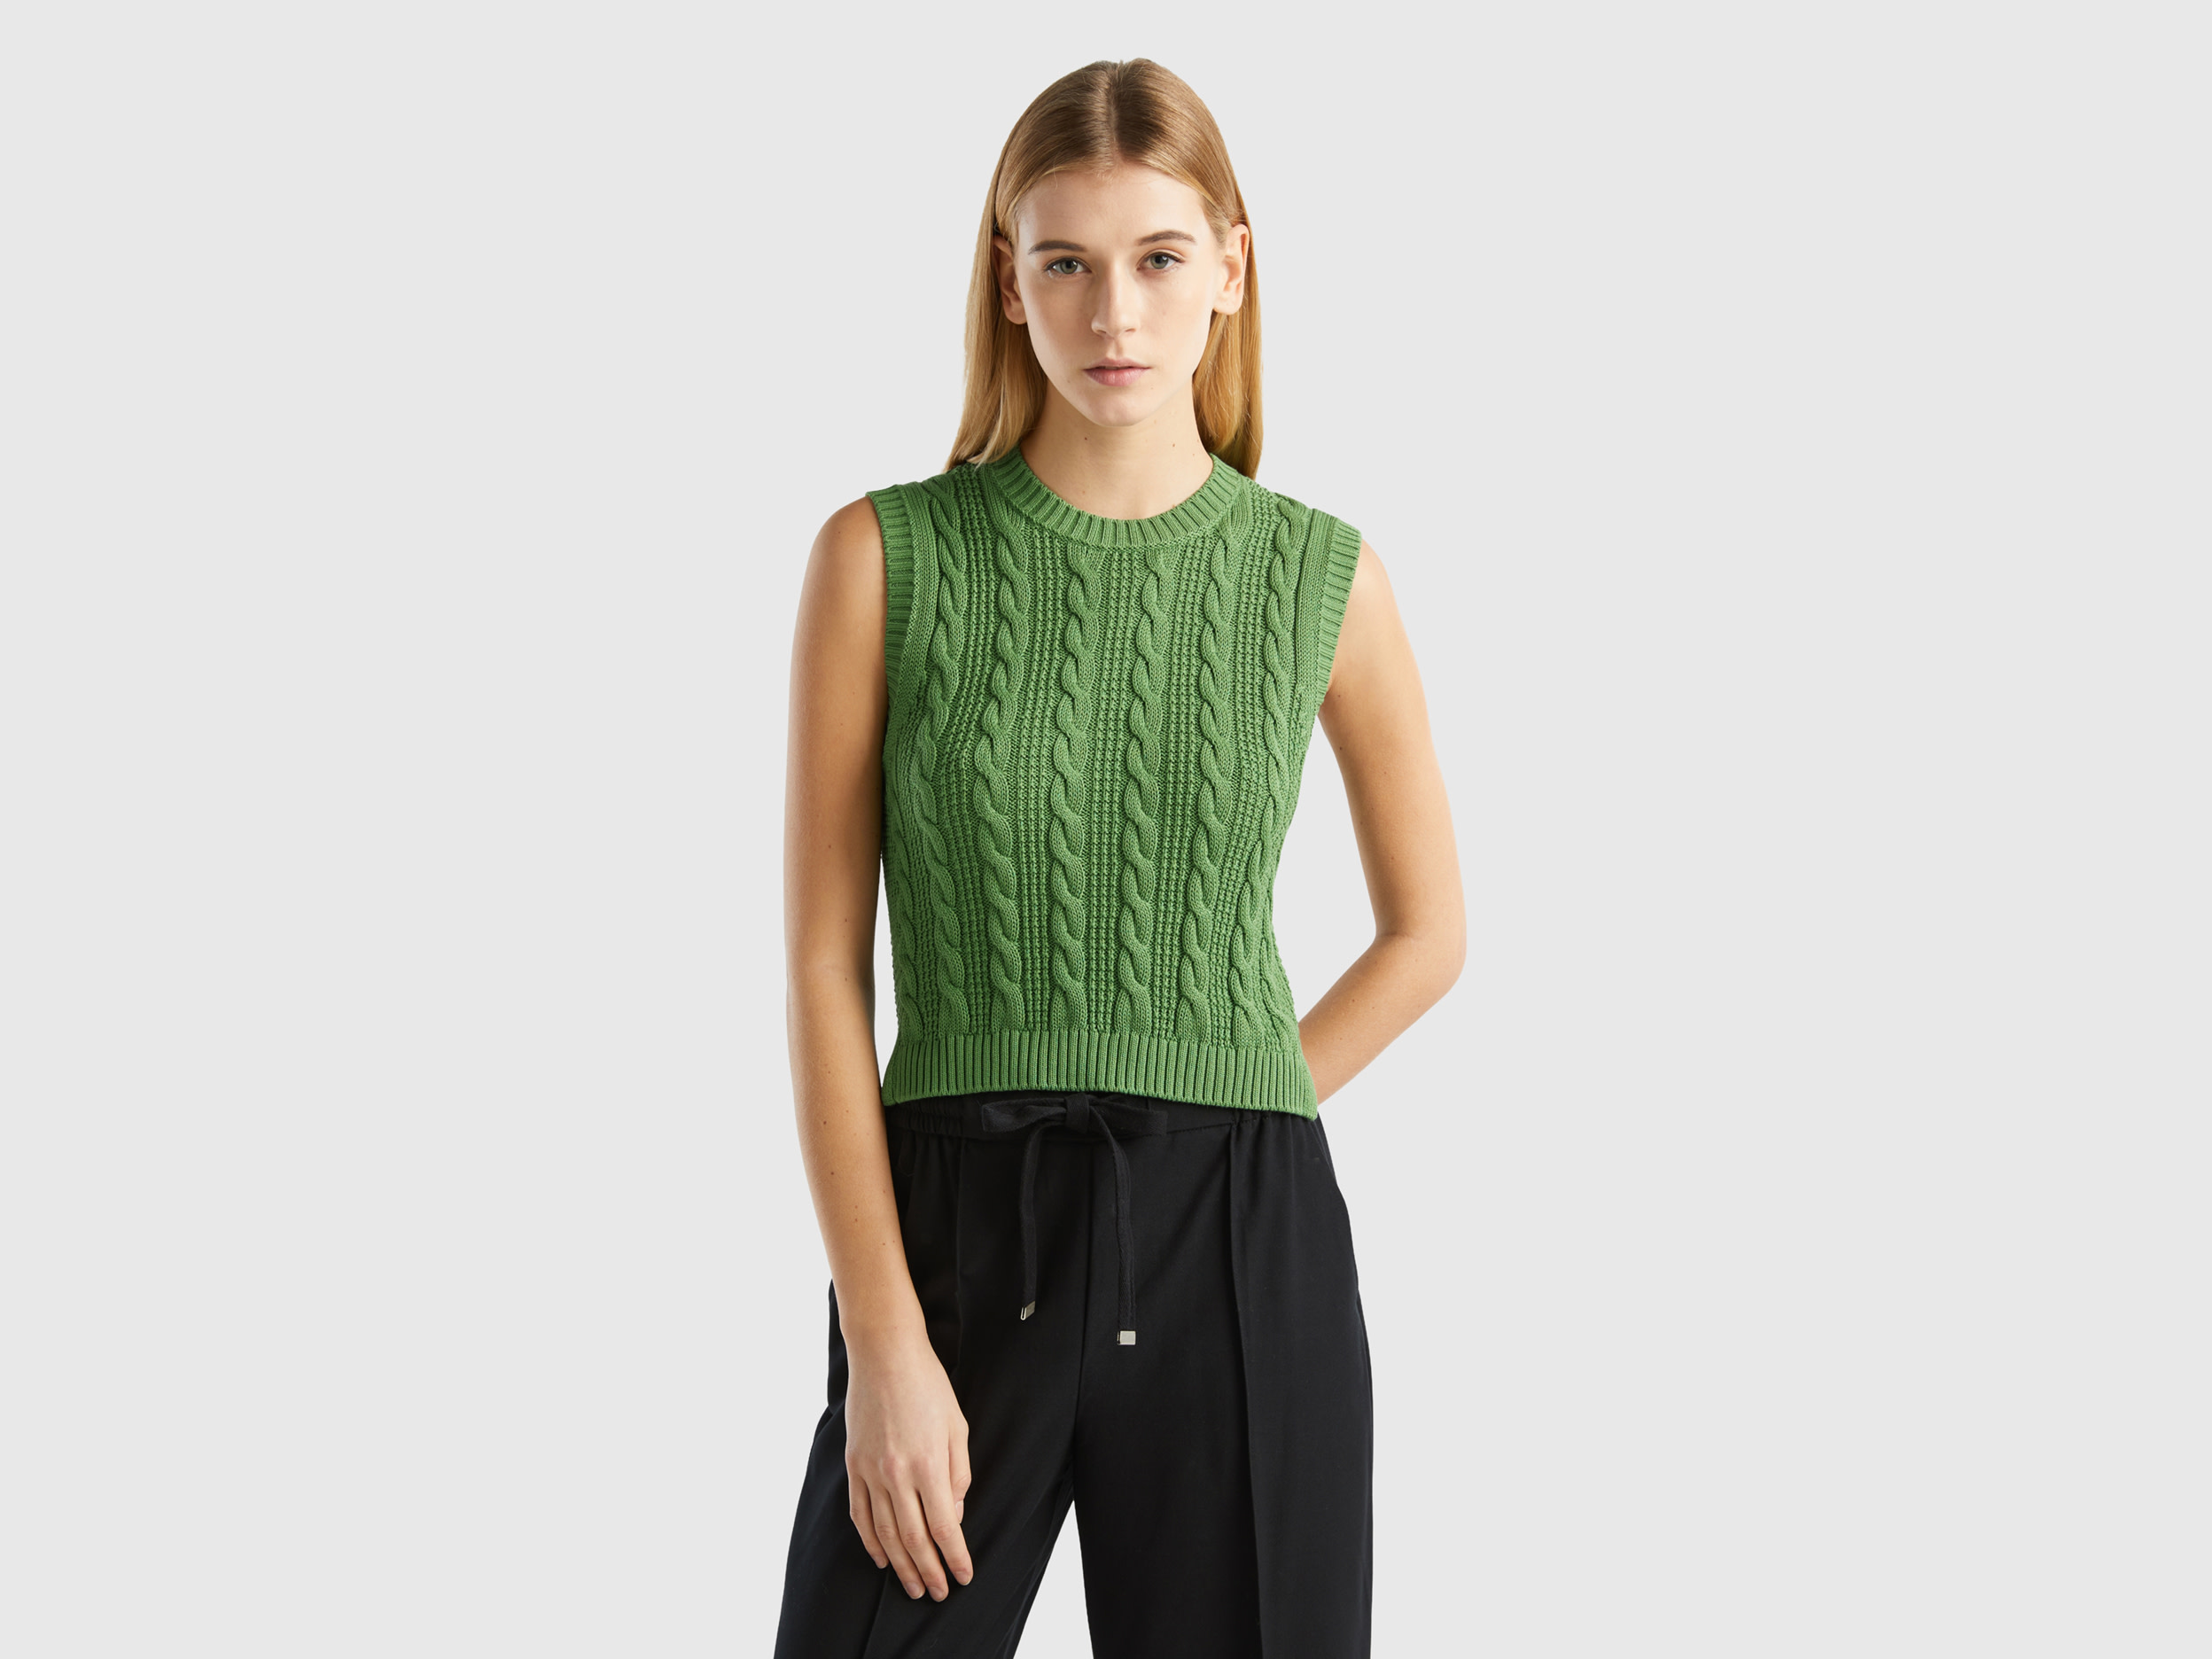 Benetton, Cropped Cable Knit Vest, size M, Military Green, Women